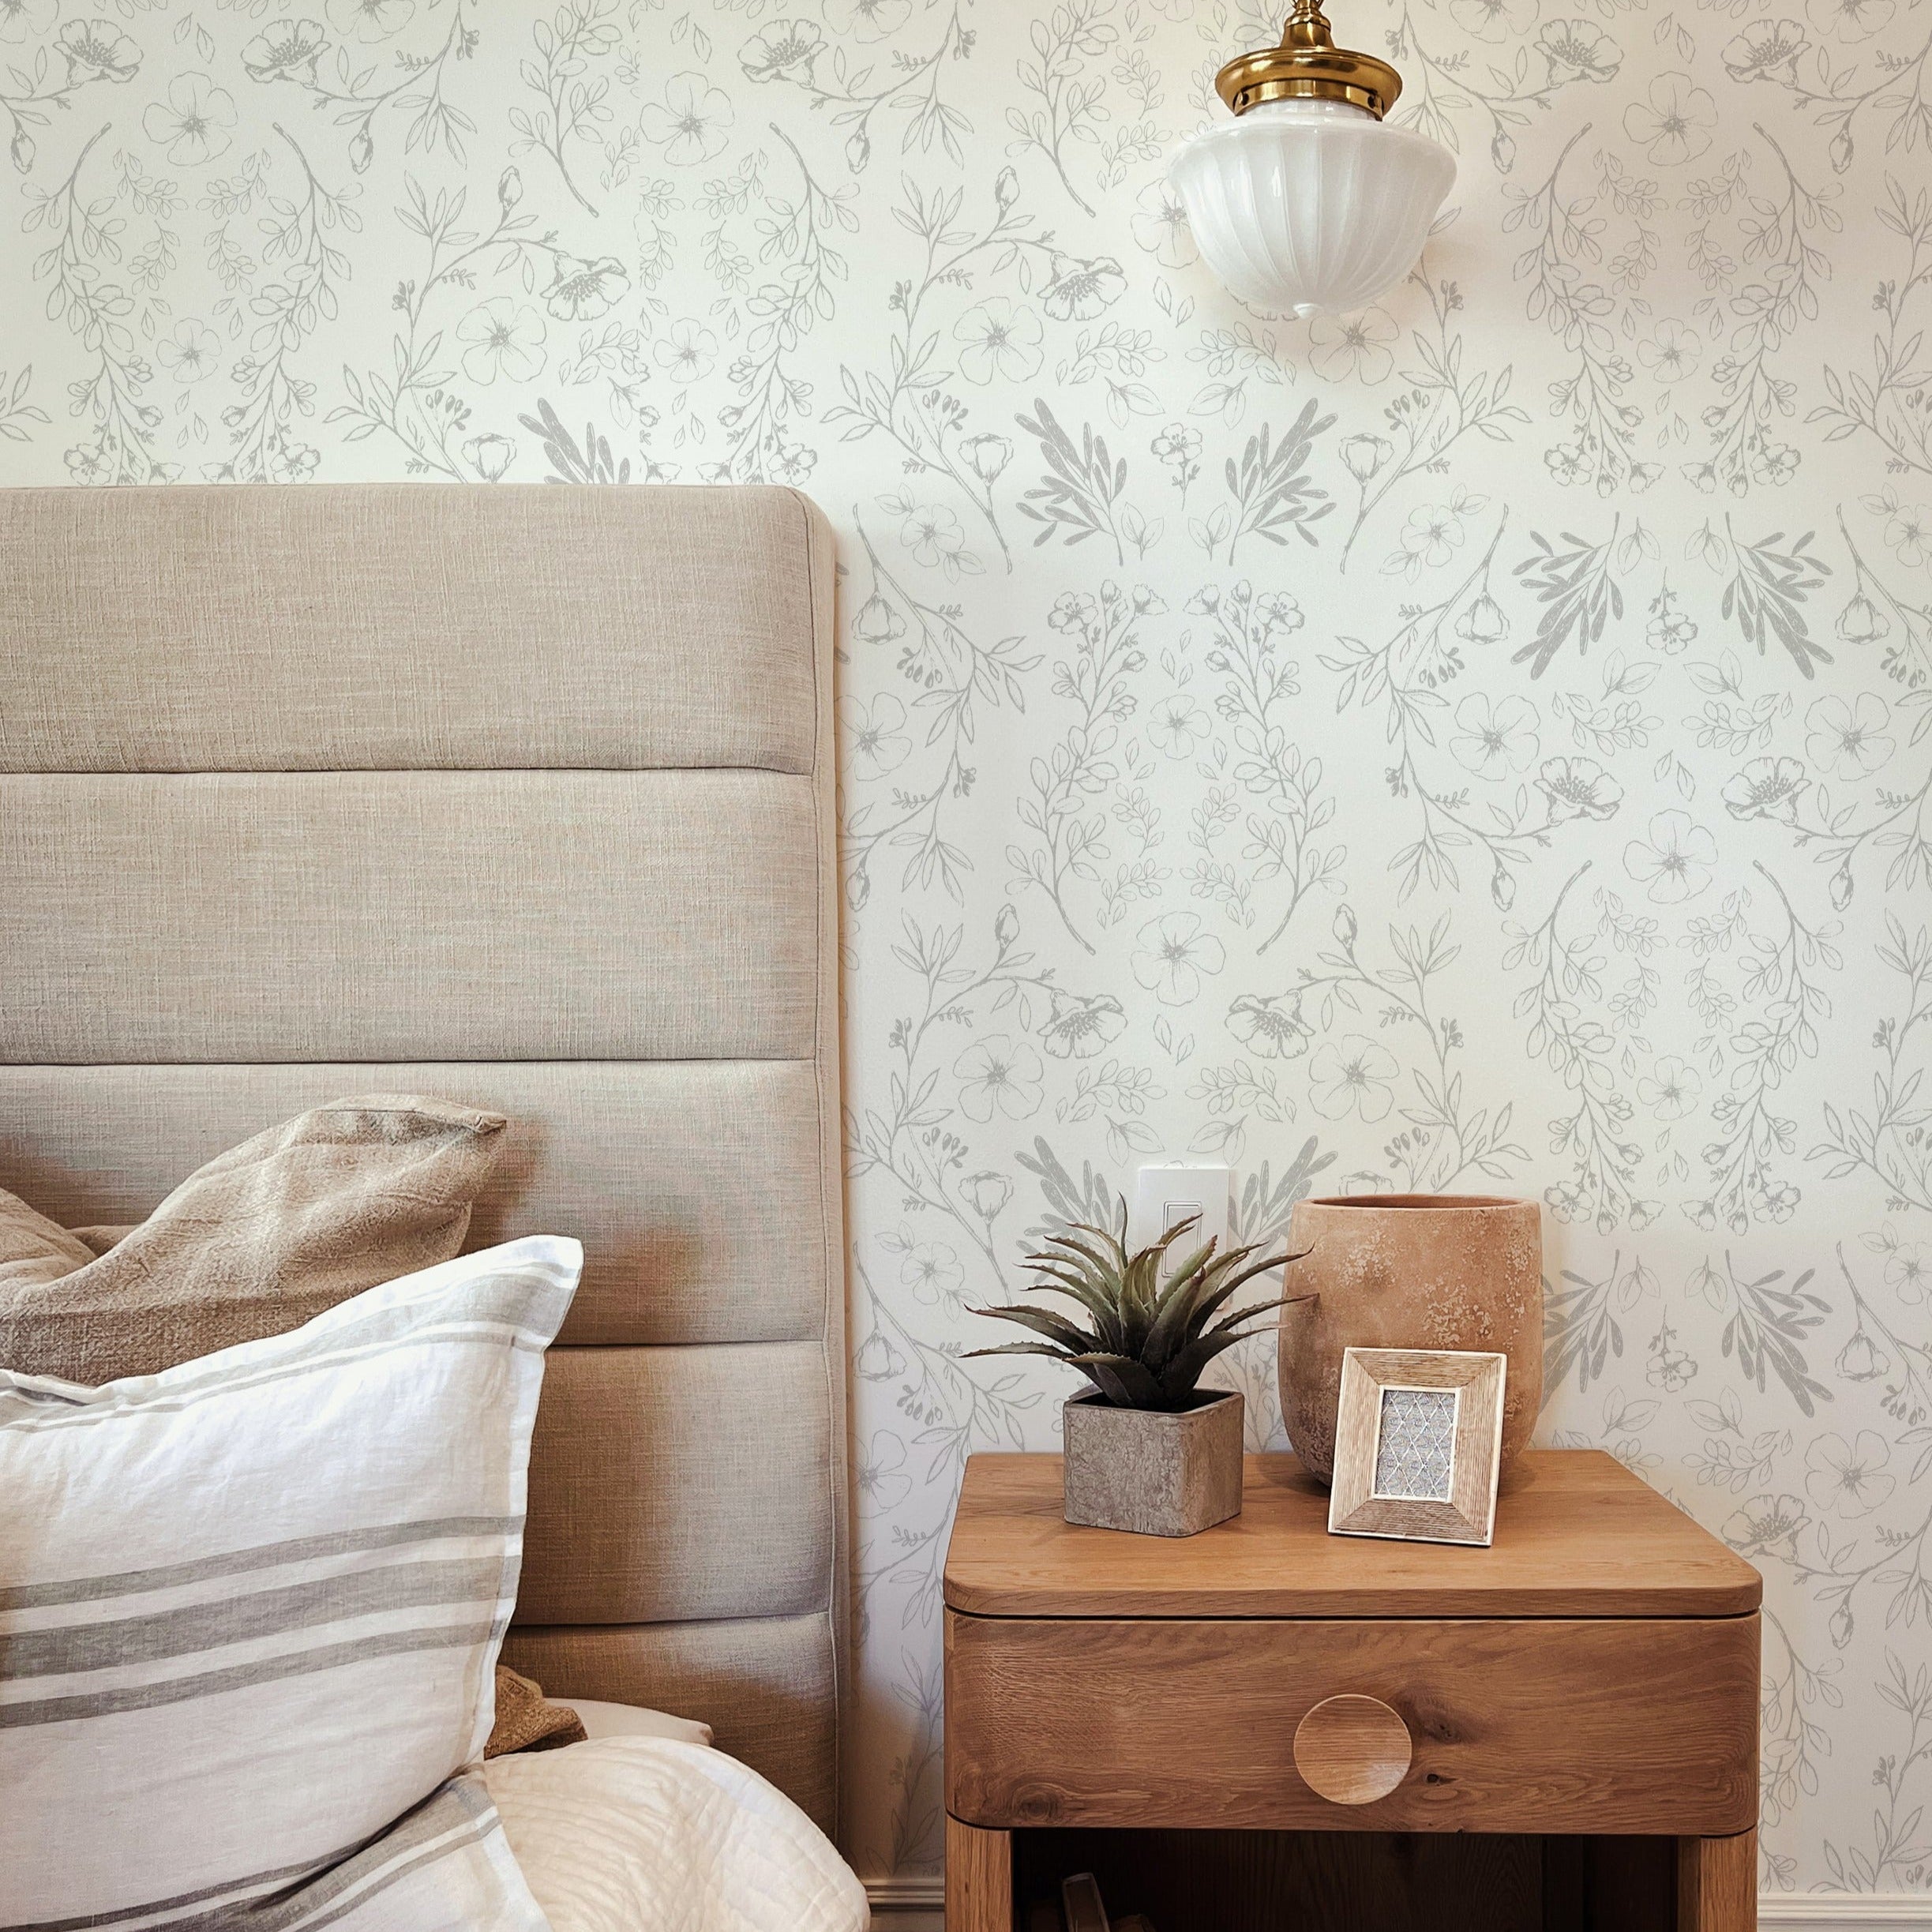 A cozy bedroom corner featuring Rustic Vintage Floral wallpaper, providing a soft, vintage aesthetic that complements the plush bedding and wooden bedside accessories for a tranquil ambiance.